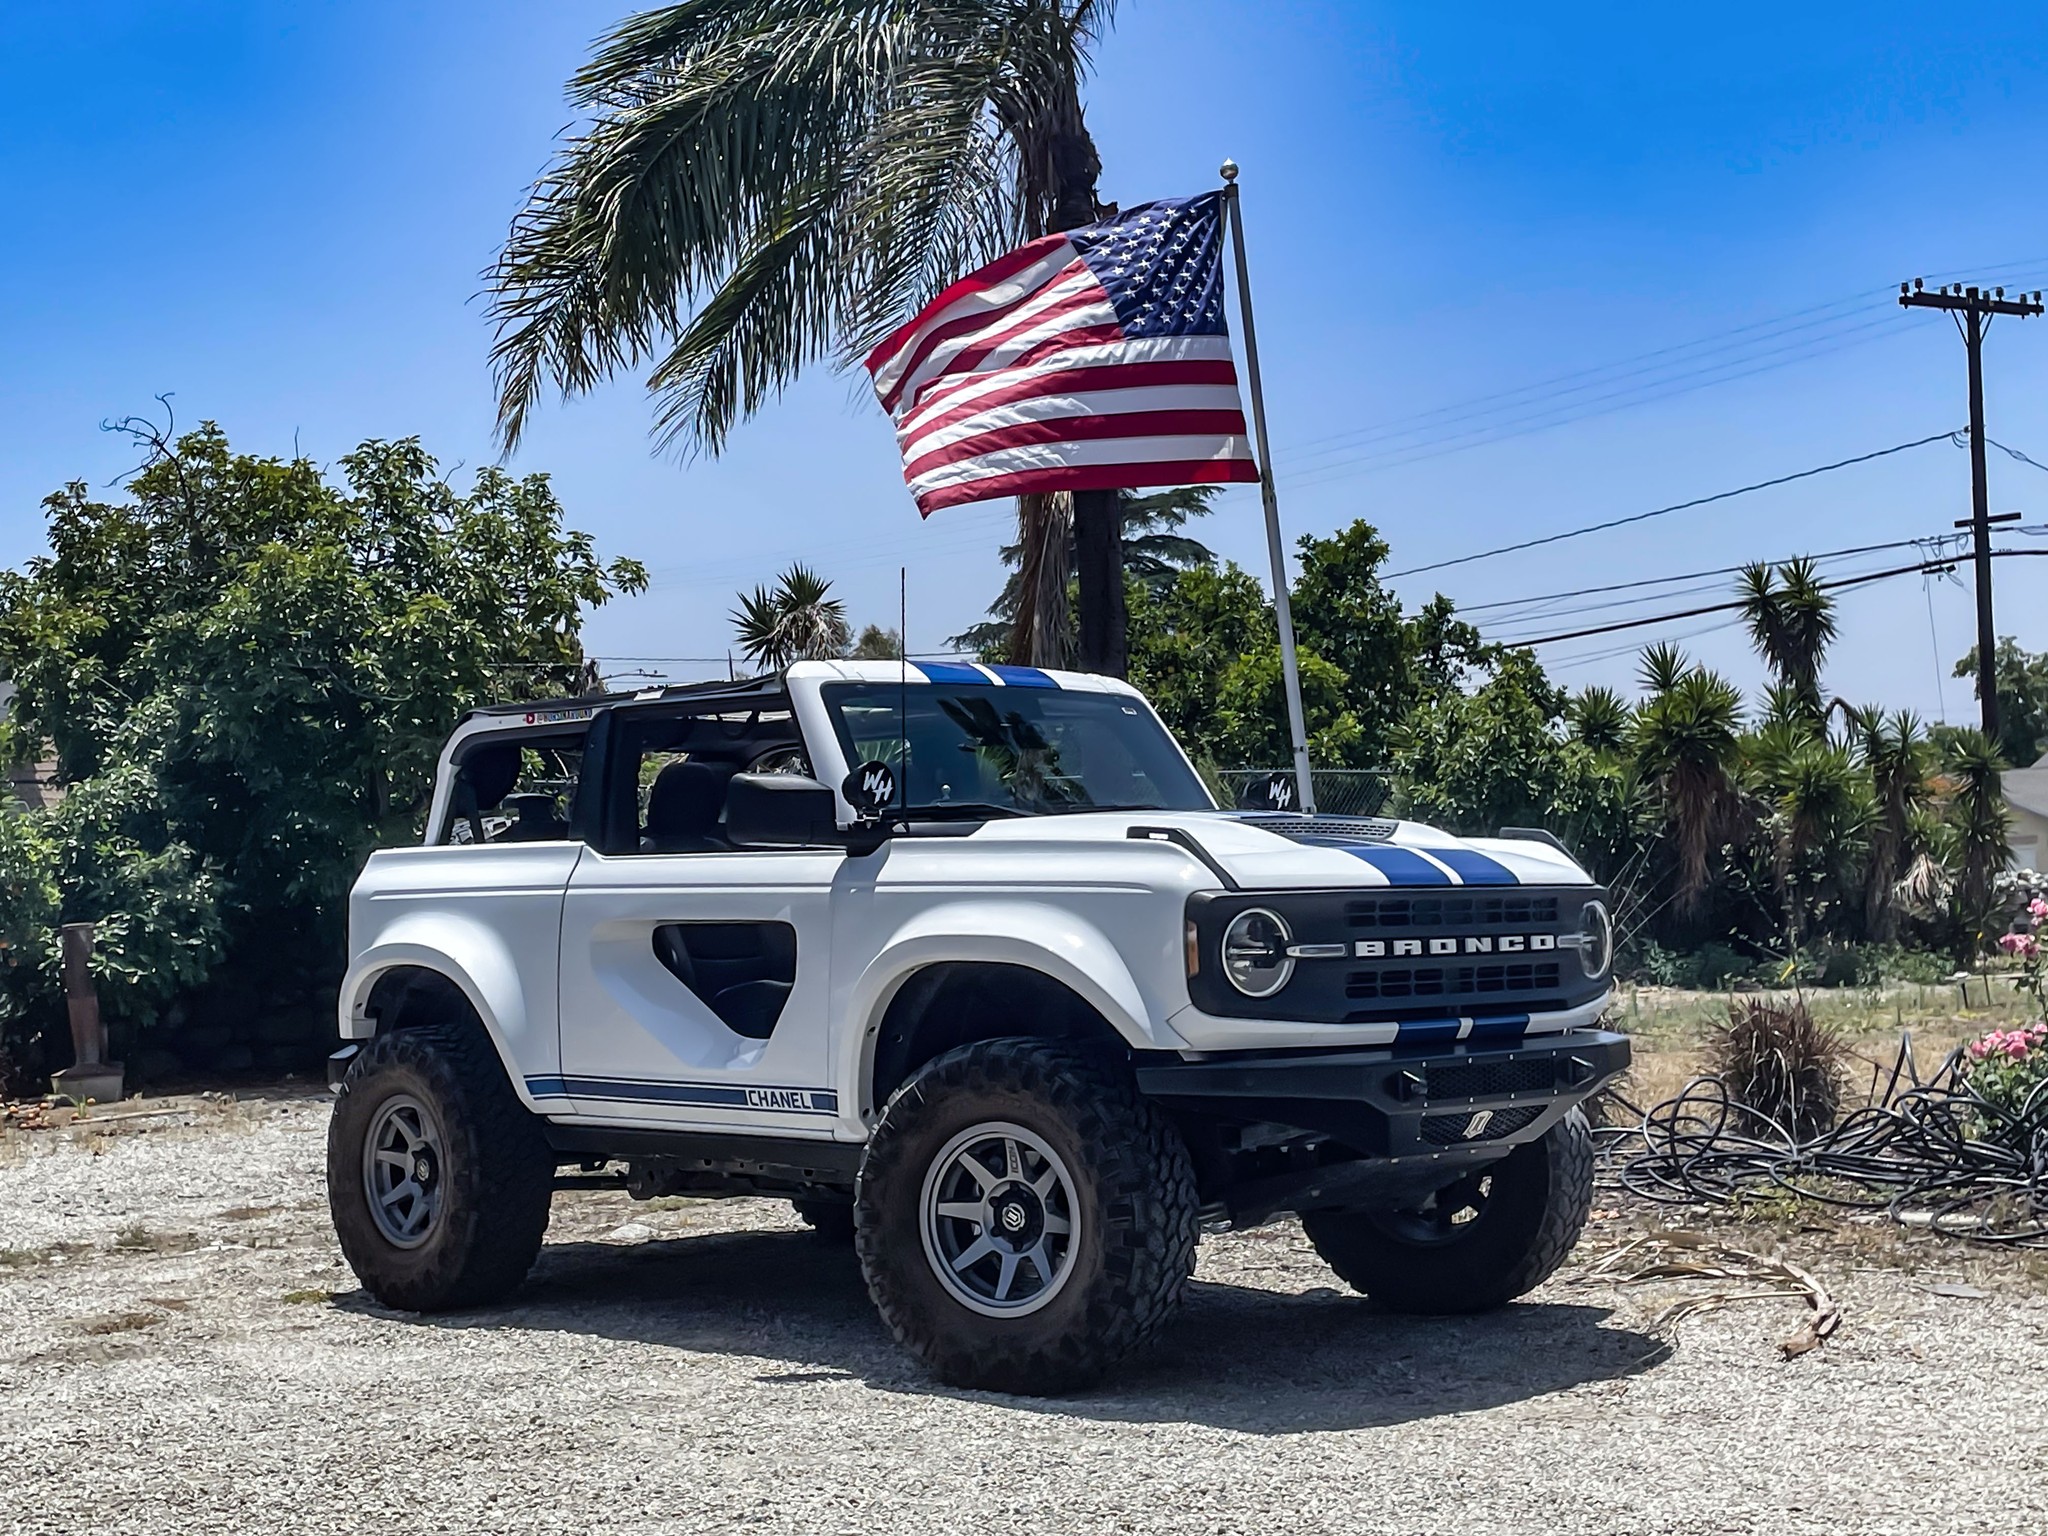 Ford Bronco The Official Bronco6G Photo Challenge Game 📸 🤳 350815735_225082486961566_125747151436969663_n